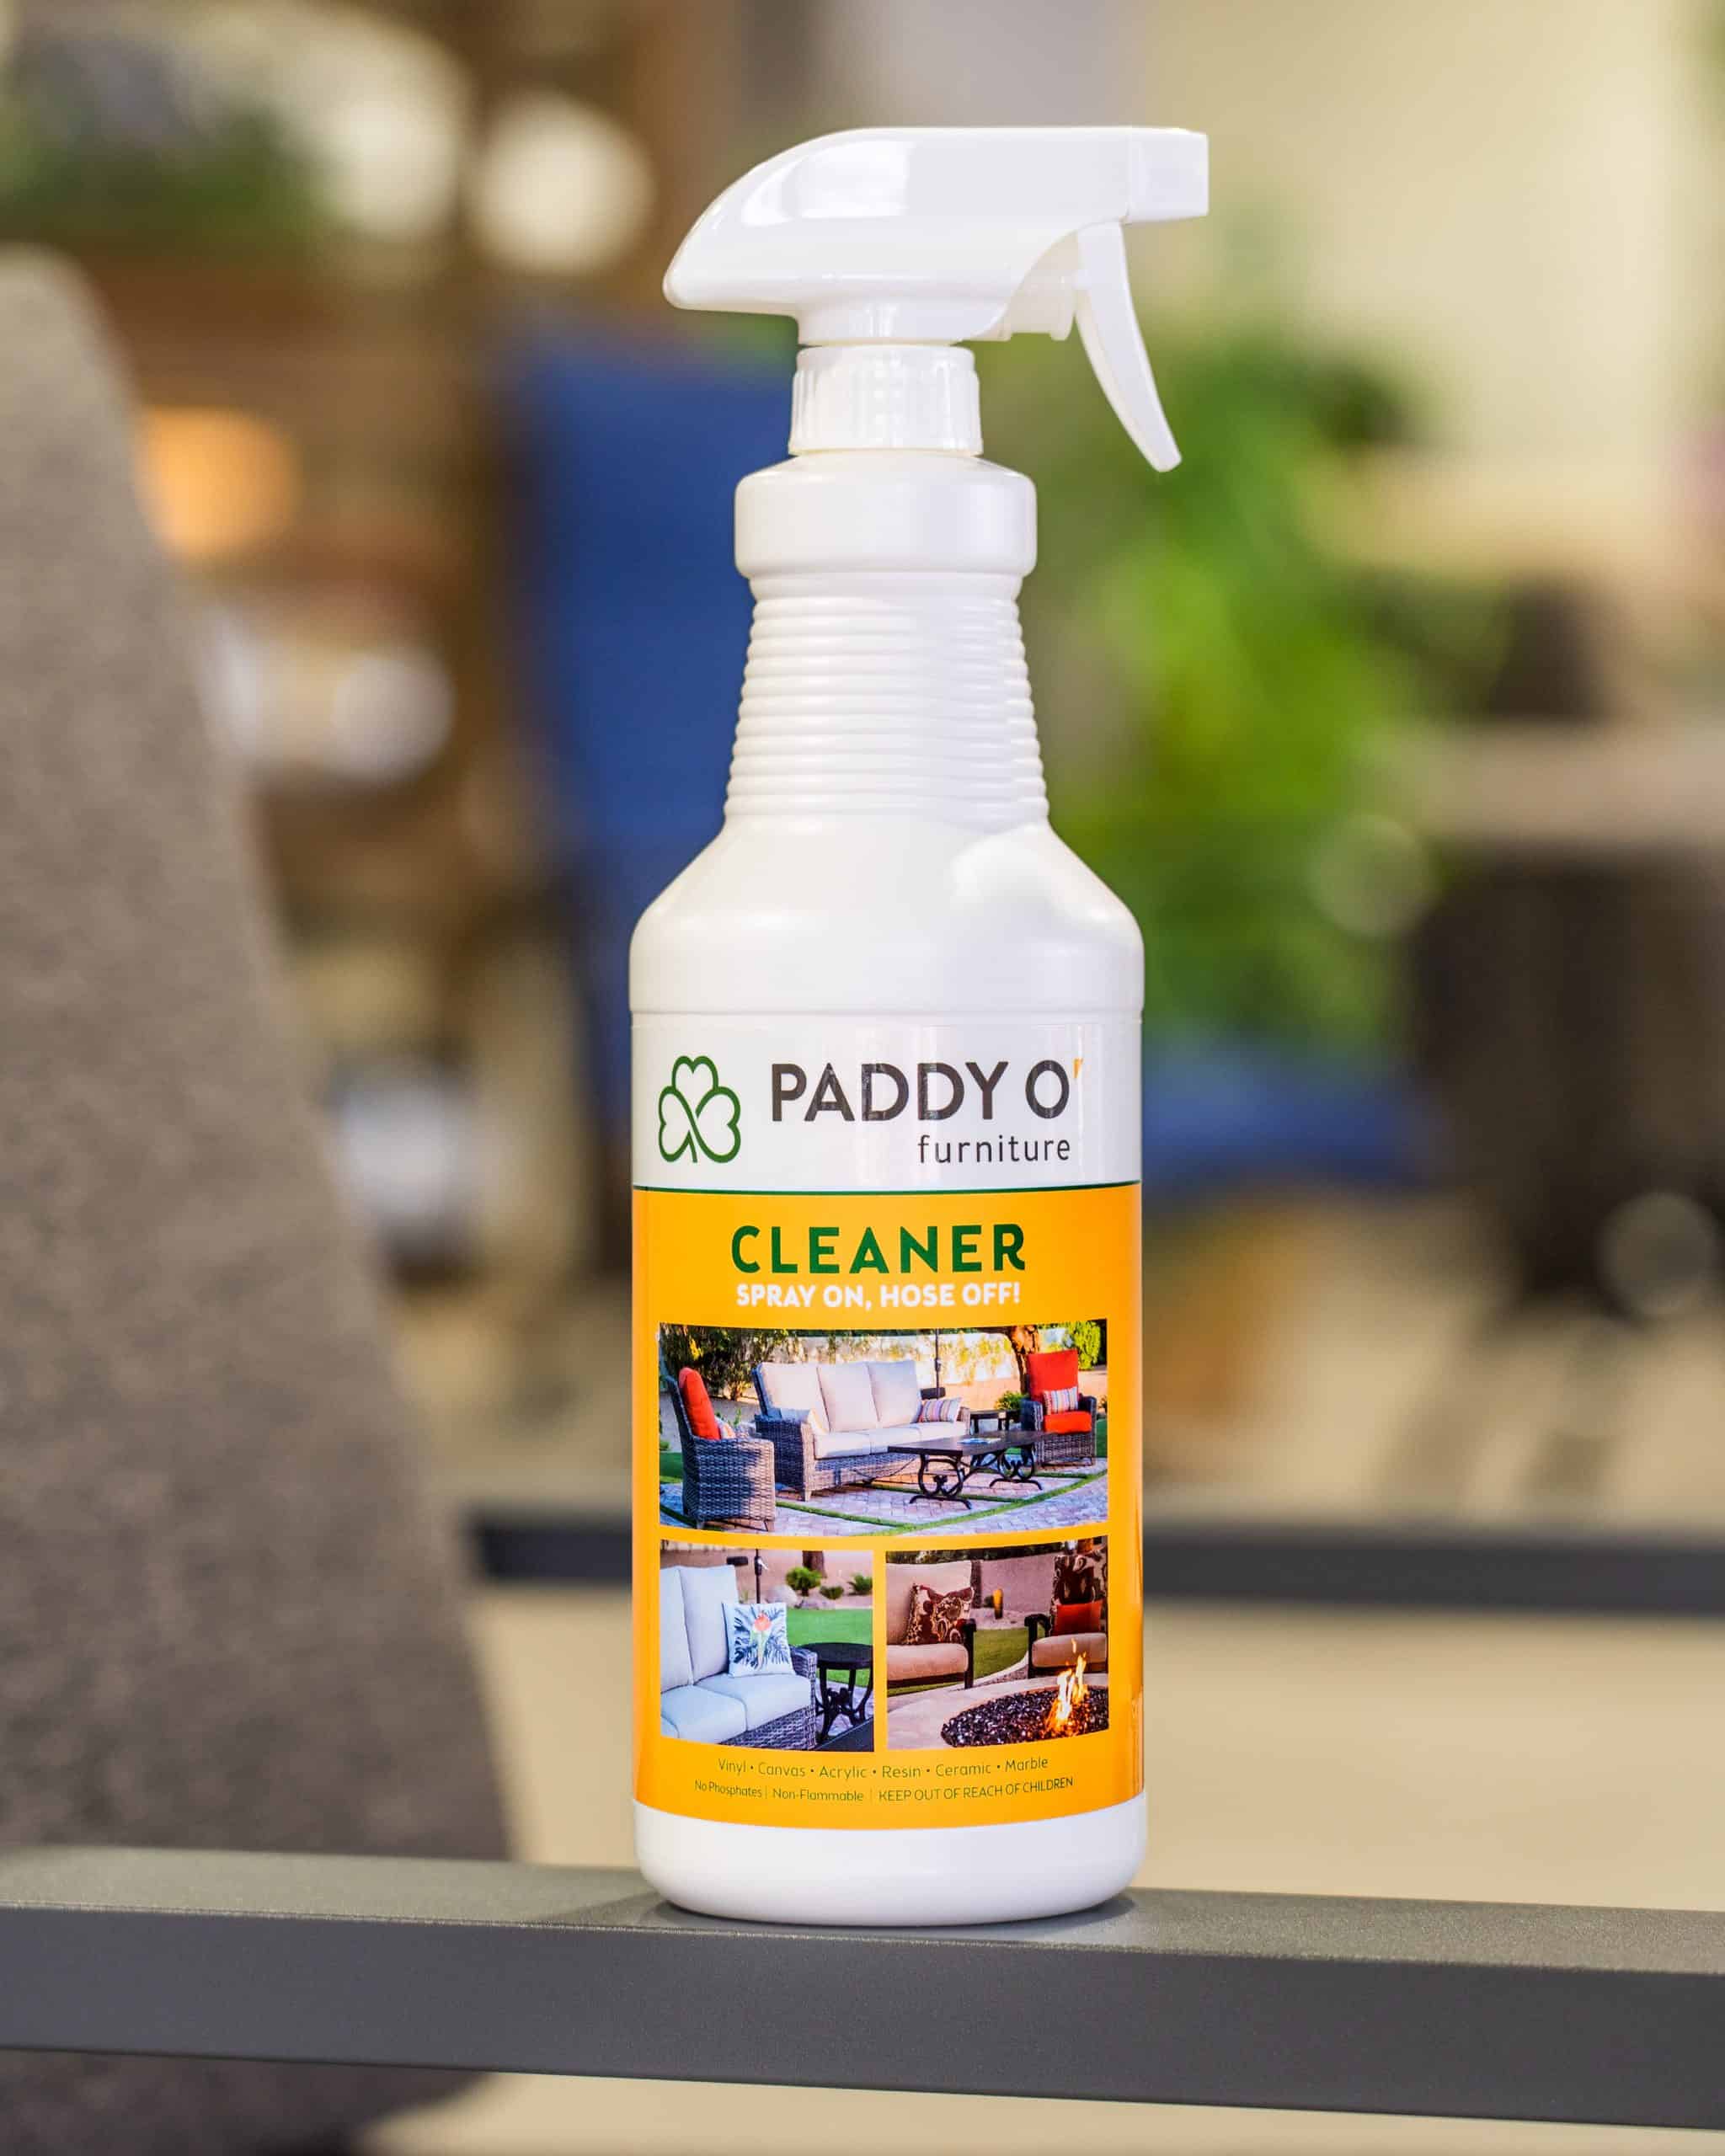 Multi Surface Patio Cleaner, Products